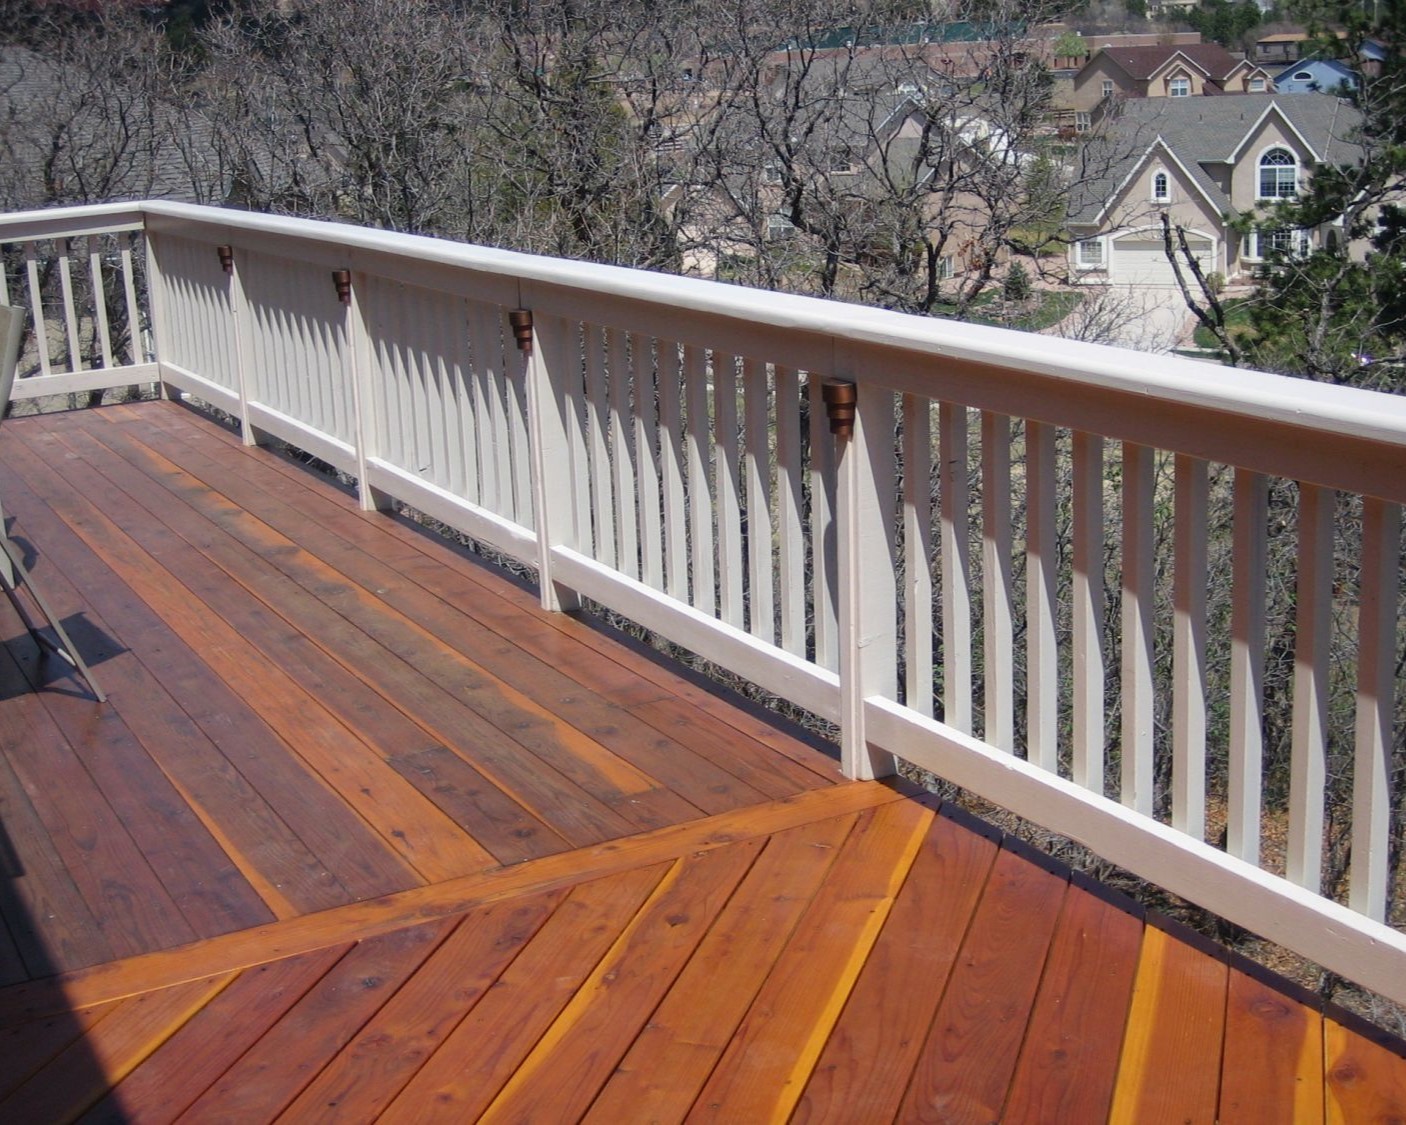 Wood deck built with the boards laid at multiple angles. The snow fence railing features a drink cap and post lights. It is is painted in white, a stark contrast to the deck's wood colored stain.